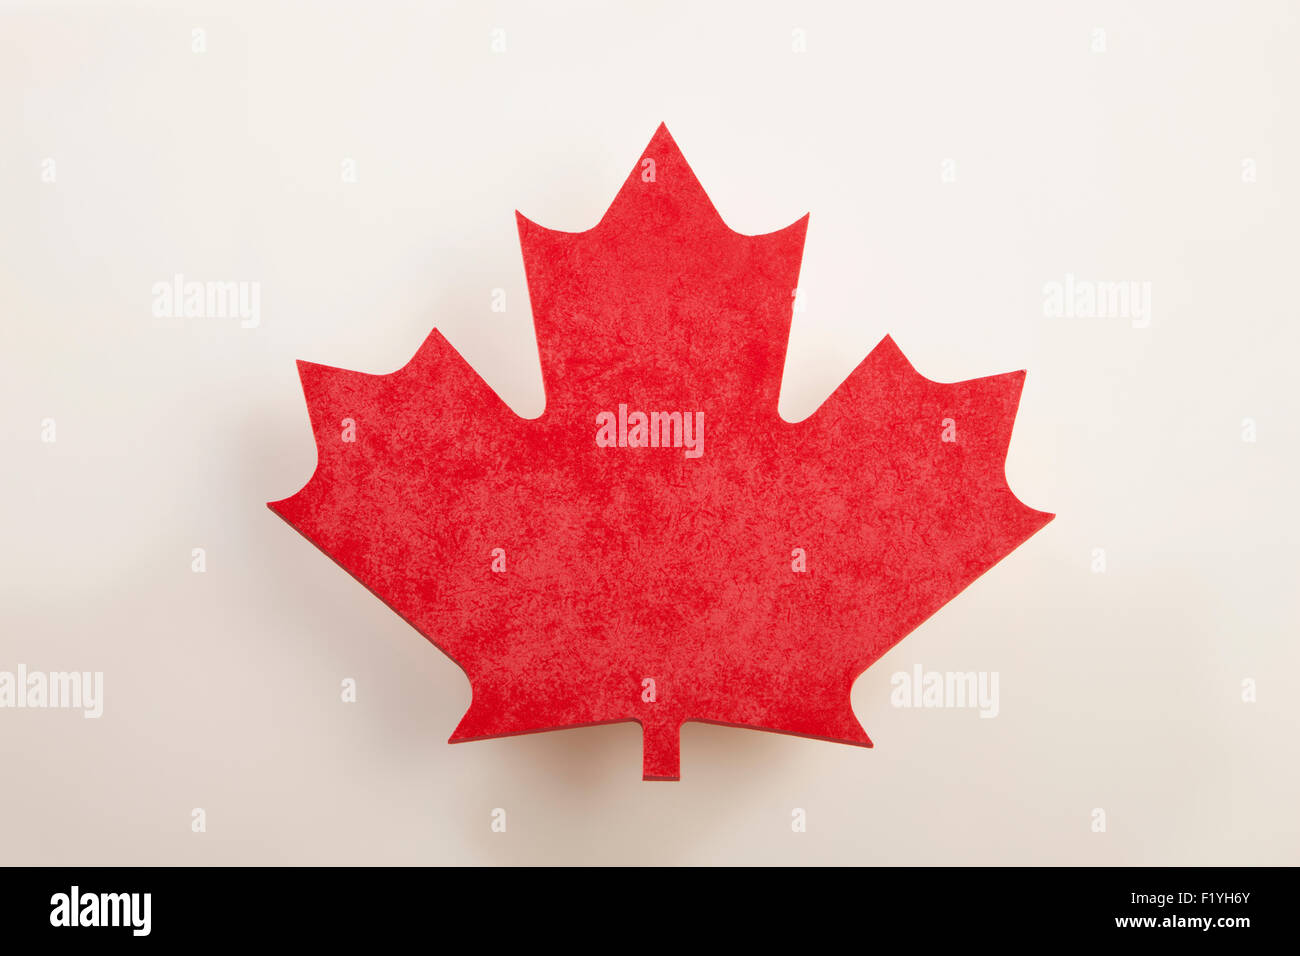 Canadian Flag Design Made Up Of A Real Maple Leaf Stock Photo